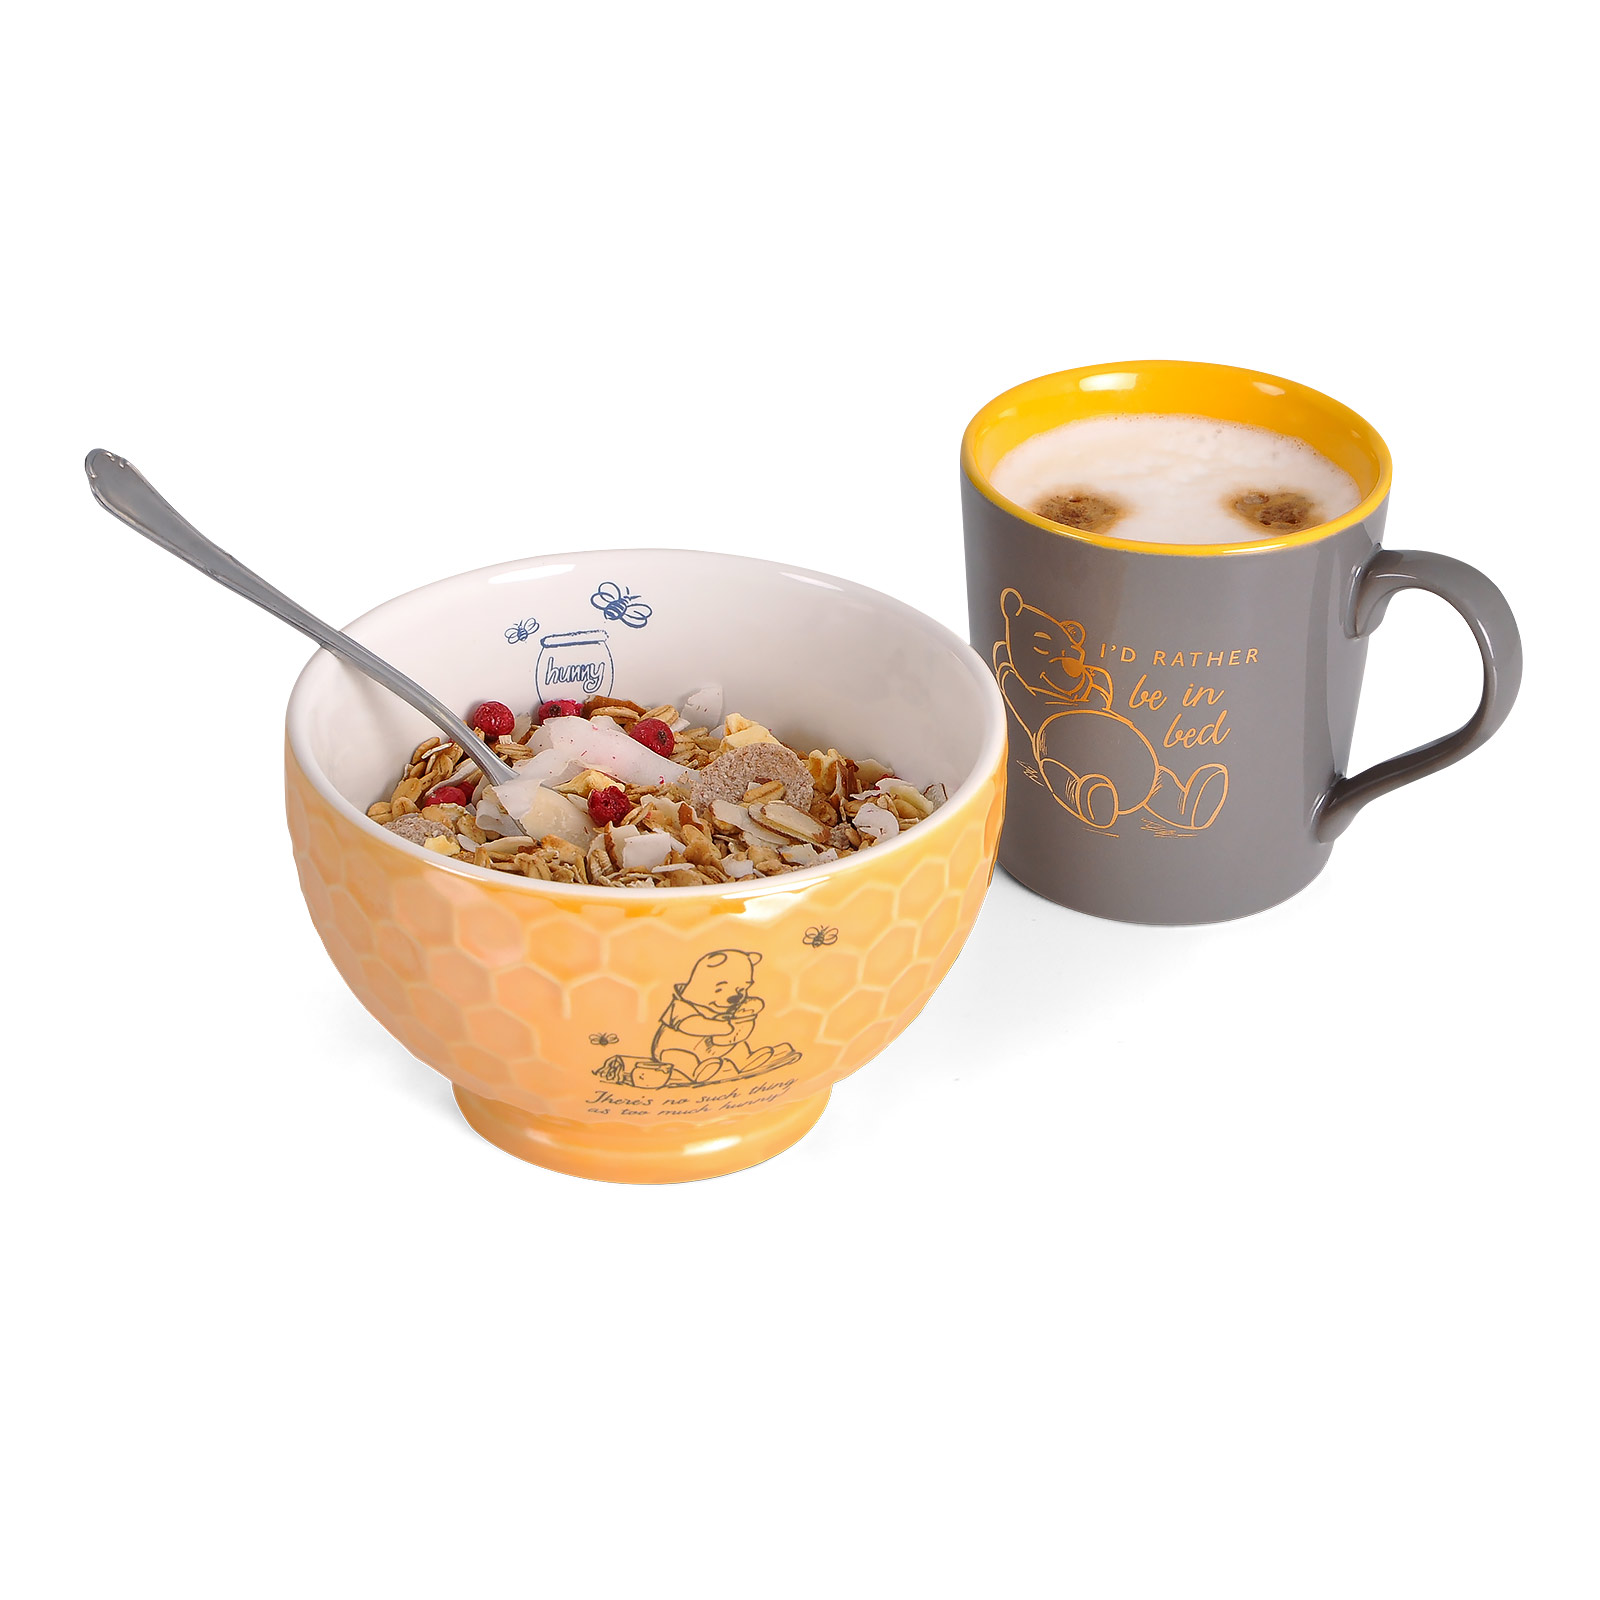 Winnie the Pooh - Hunny cereal bowl